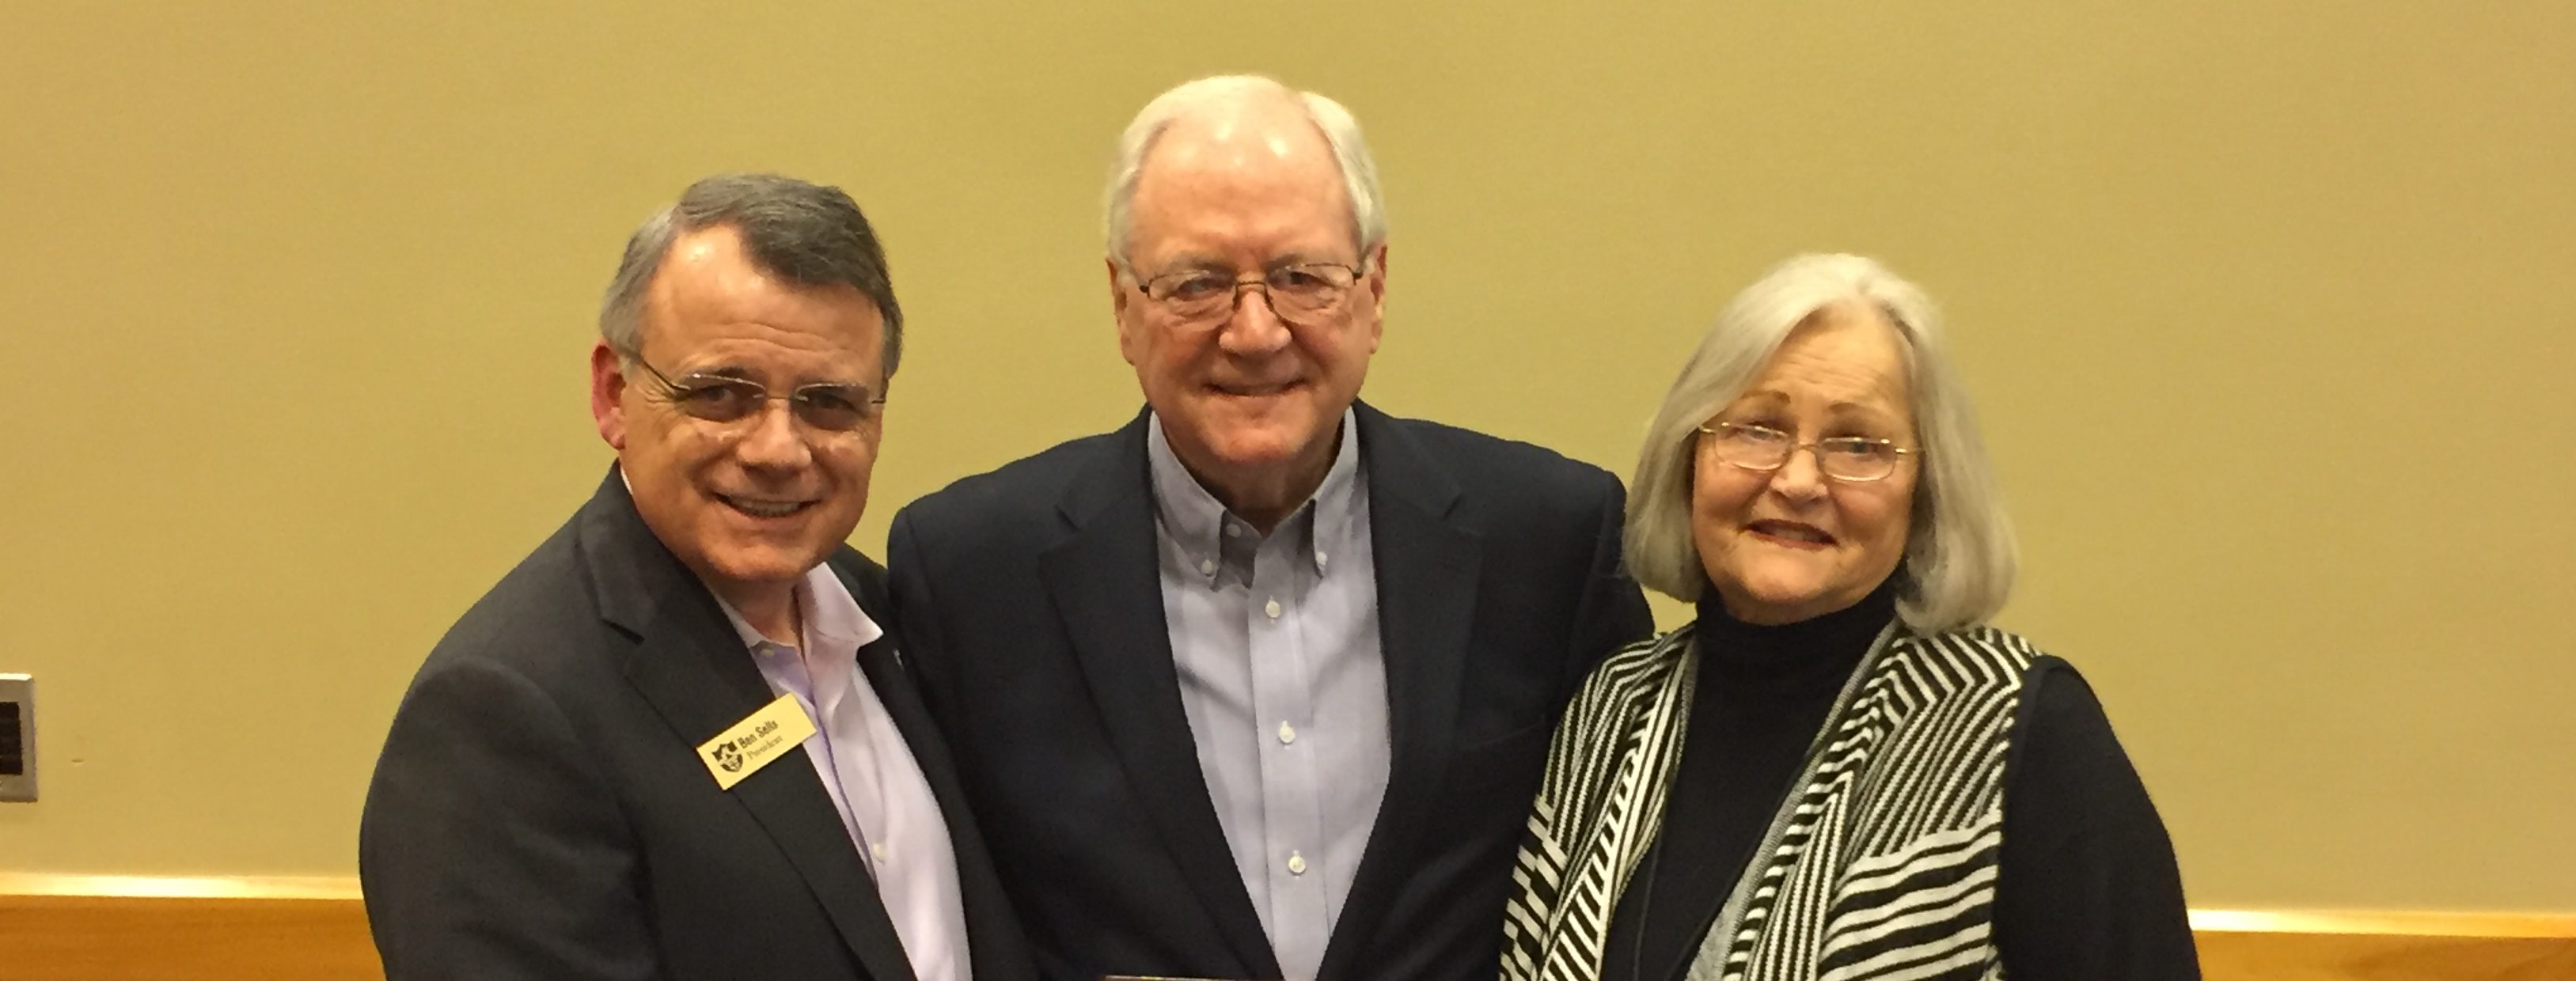 Dennis Wilkins (center), seen here with his wife, Marsha, was presented with the ABSC Associational Missionary of the Year award by Ouachita Baptist University President Ben Sells (left).